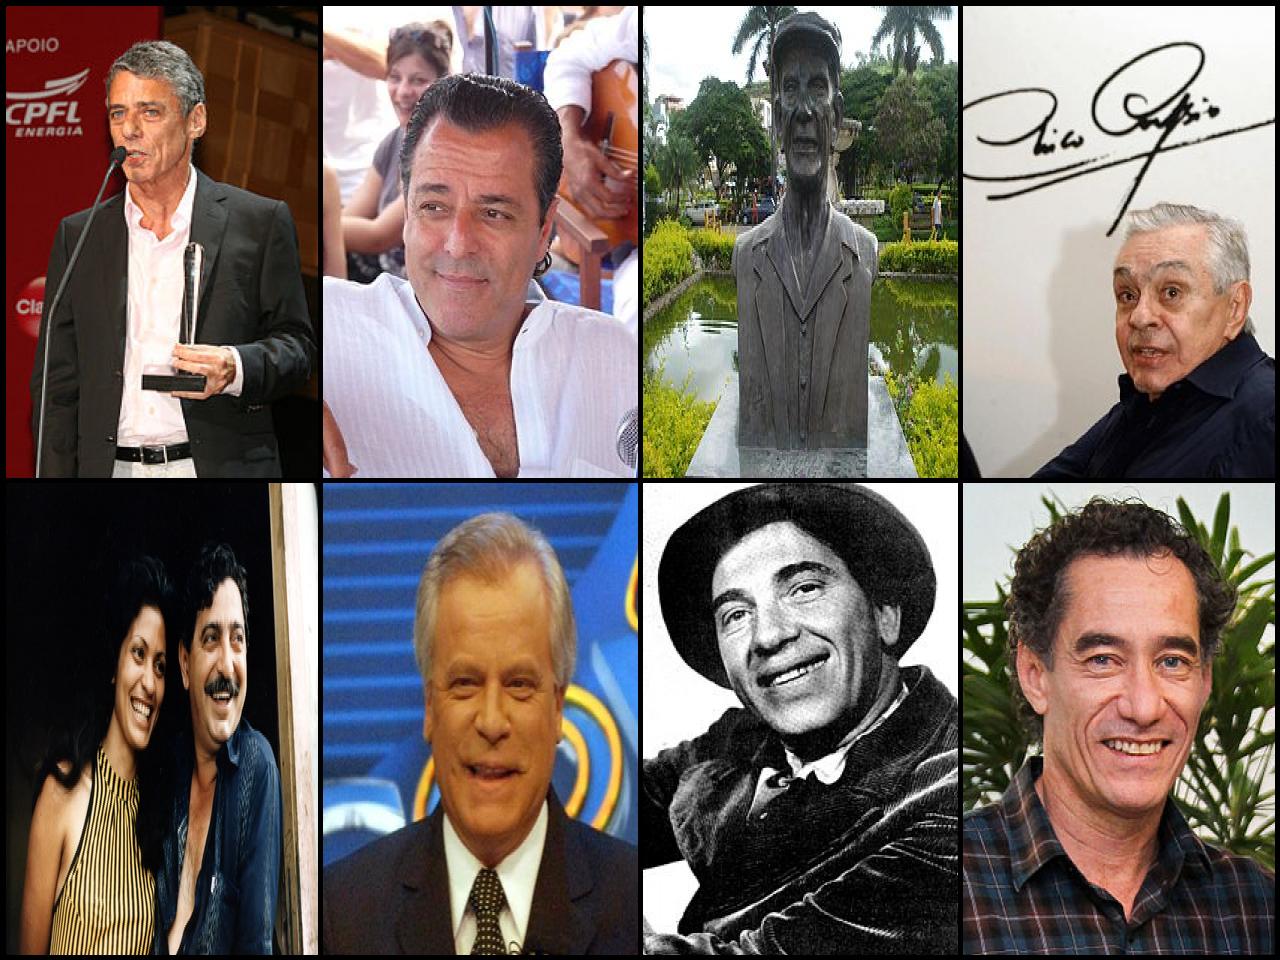 List of Famous people named <b>Chico</b>